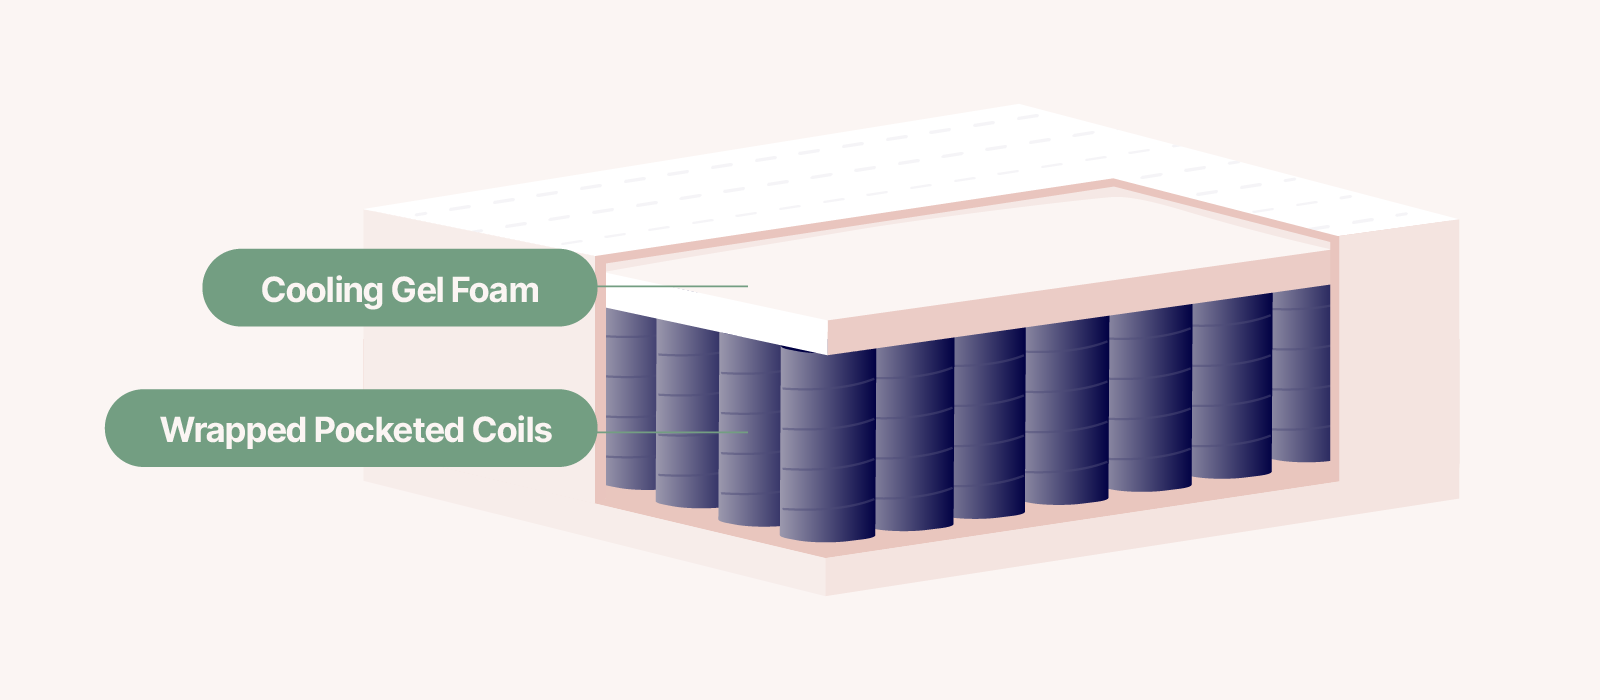 illustration showing the inner components of a typical innerspring mattress there are two inner layers with text indicating that a small top layer is cooling gel foam while the majority of the mattress is made up by wrapped pocketed coils